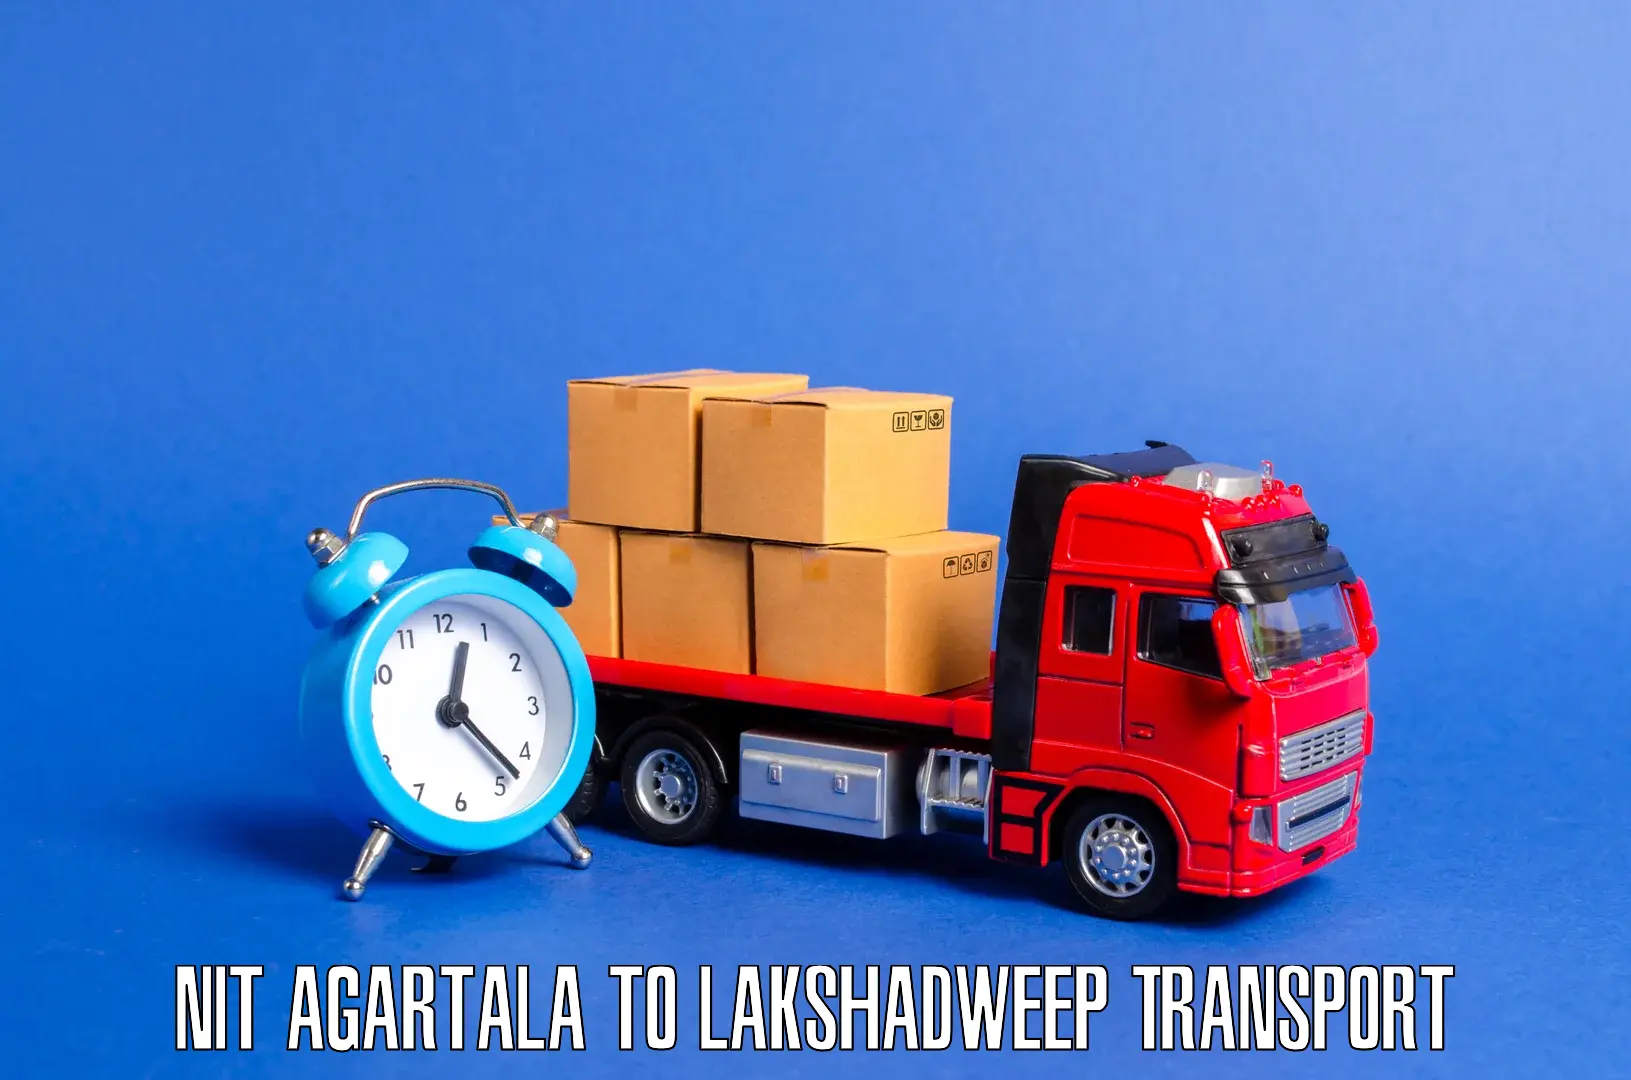 Delivery service NIT Agartala to Lakshadweep